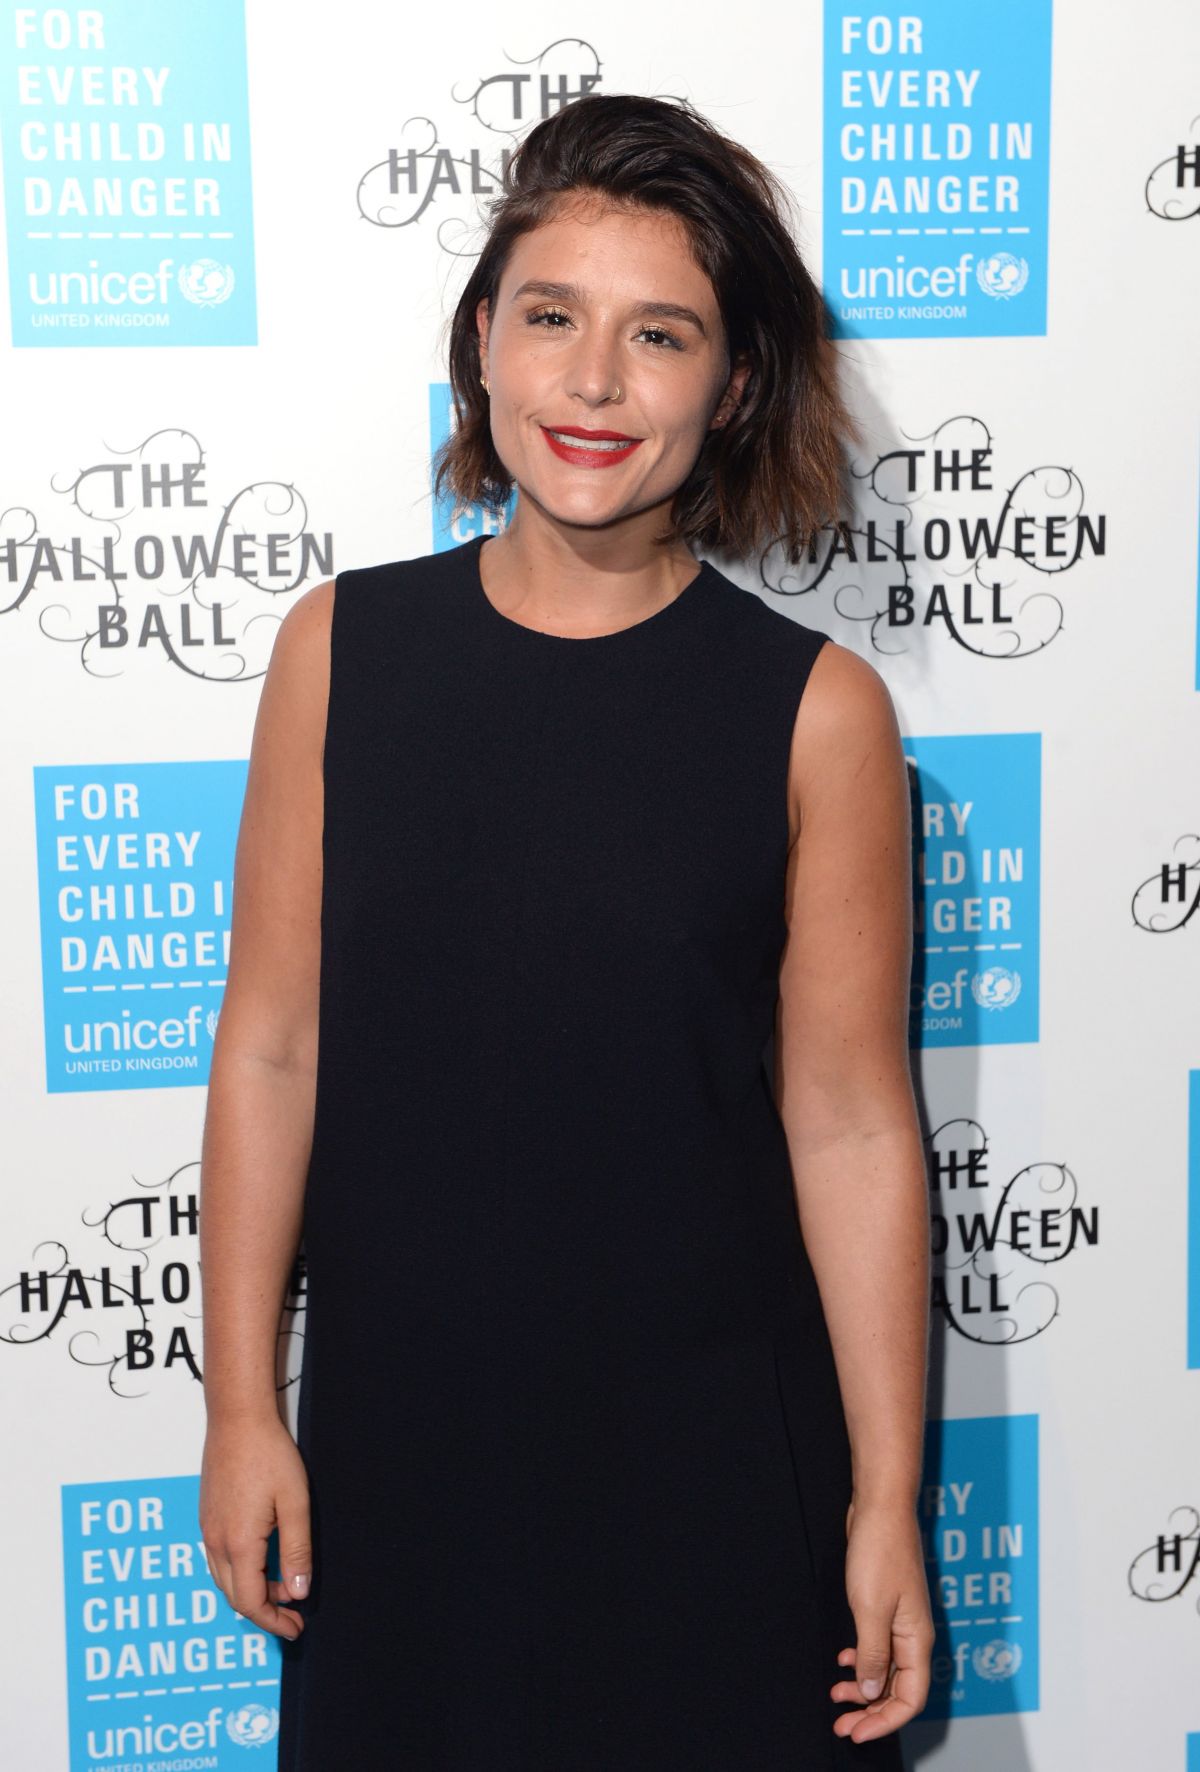 JESSIE WARE at 2015 Unicef Halloween Ball at One Mayfair in London 10/29/2015